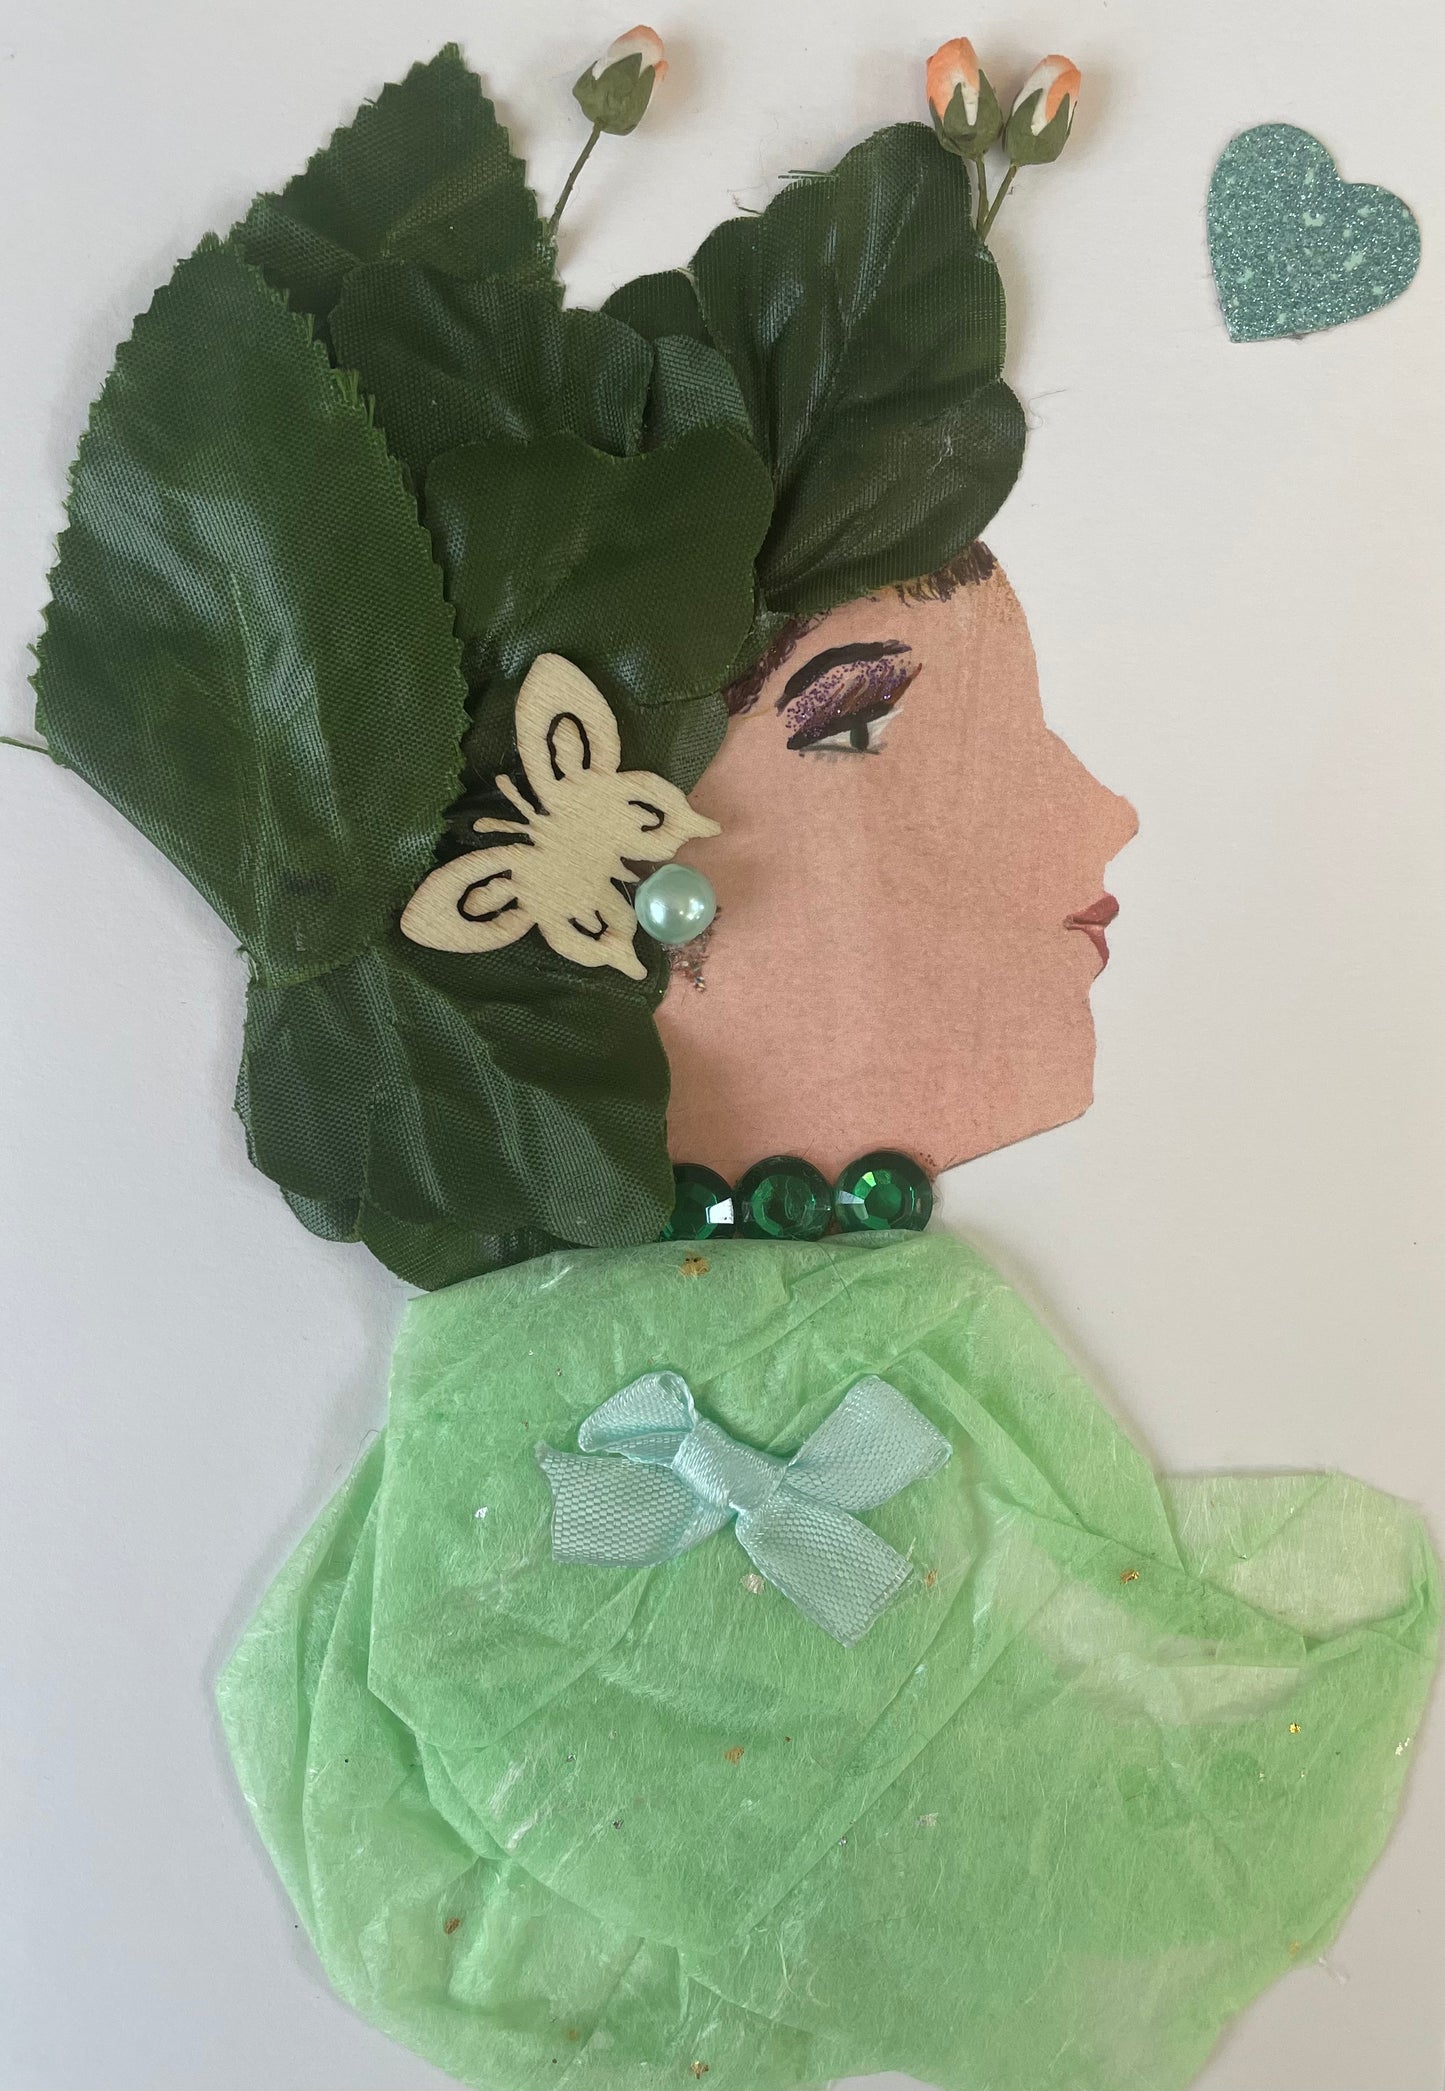 This handmade card called Celery Cyprus is wearing a light green blouse that she pairs it with a light blue bow and dark green necklace. She has a dark green leaf like headpiece with tulips coming out from the top and a butterfly bow.. There is a sparkly blue heart to the right of her. 